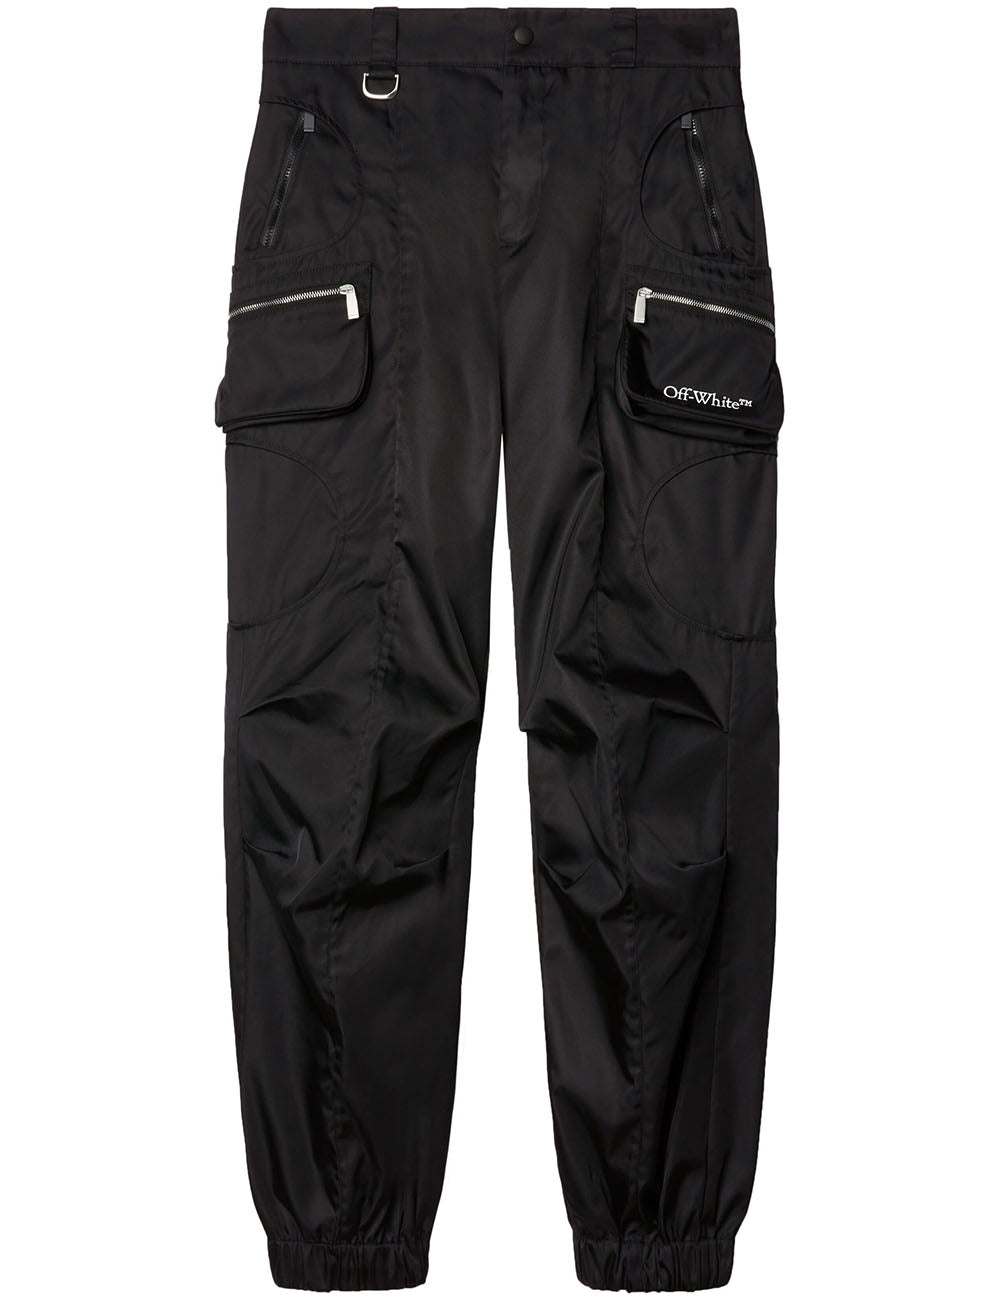 OFF WHITE BOOK NYL CARGO PANT